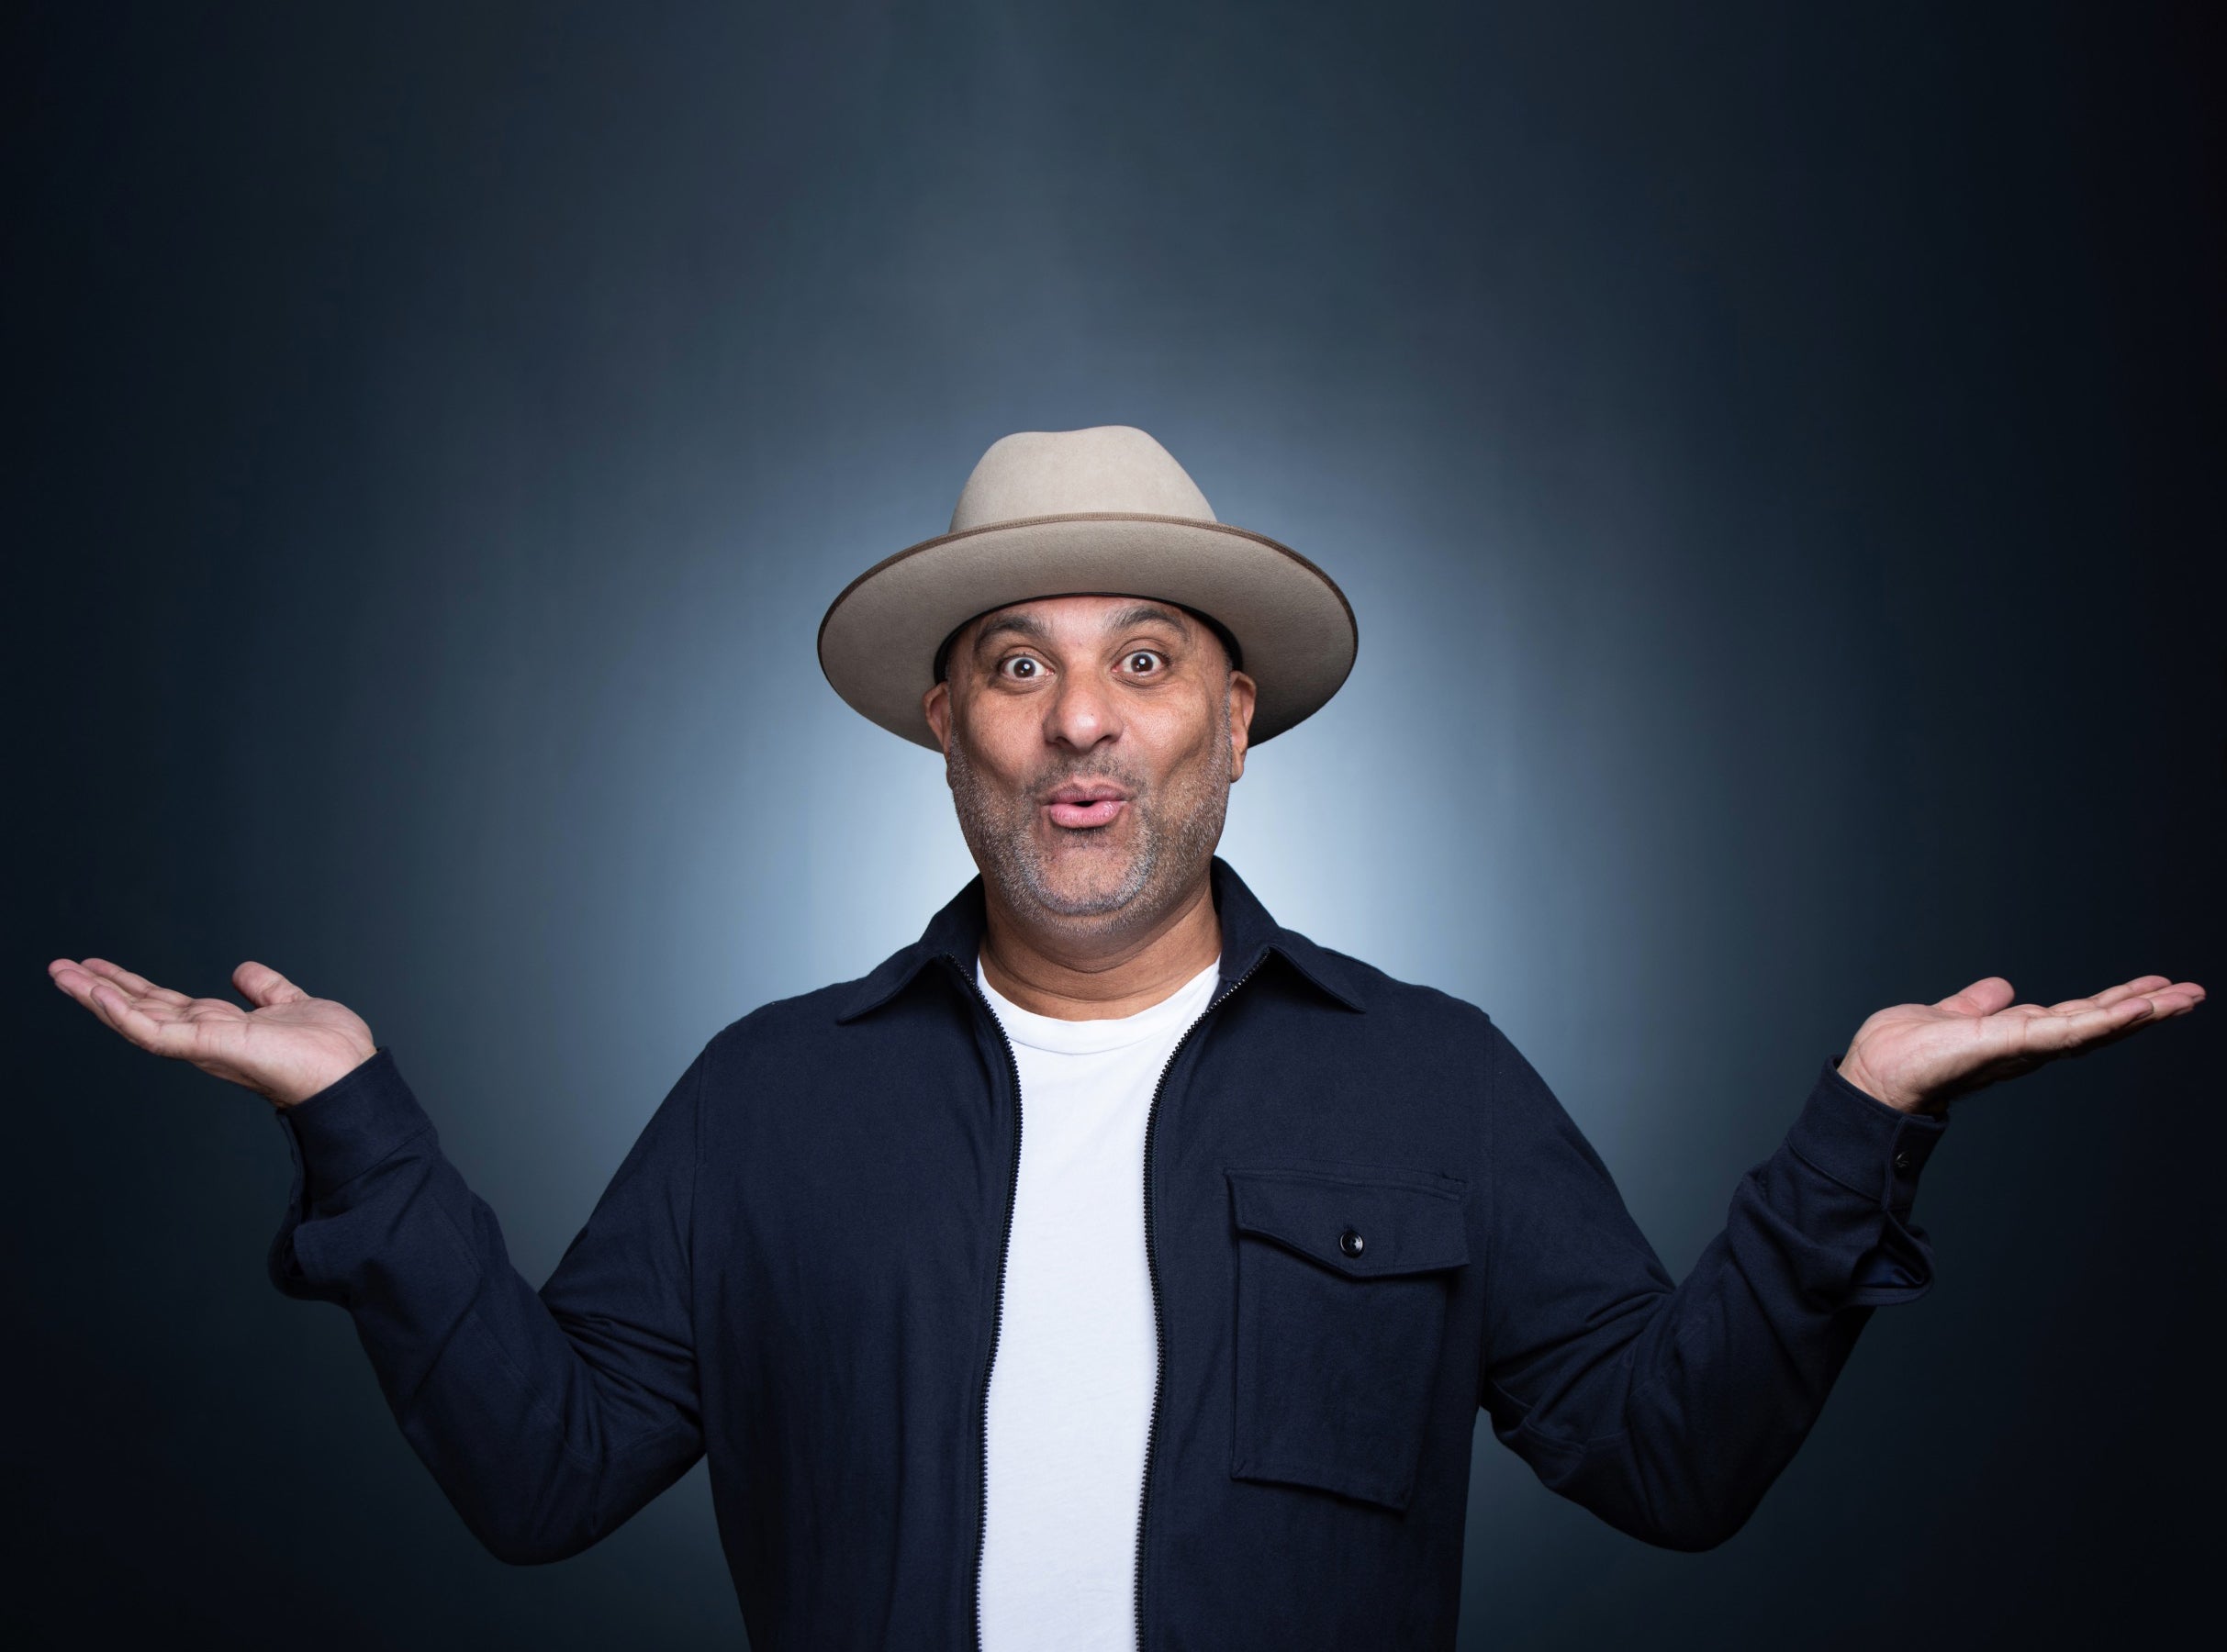 members only presale code for Russell Peters: RELAX World Tour face value tickets in Vancouver at Rogers Arena